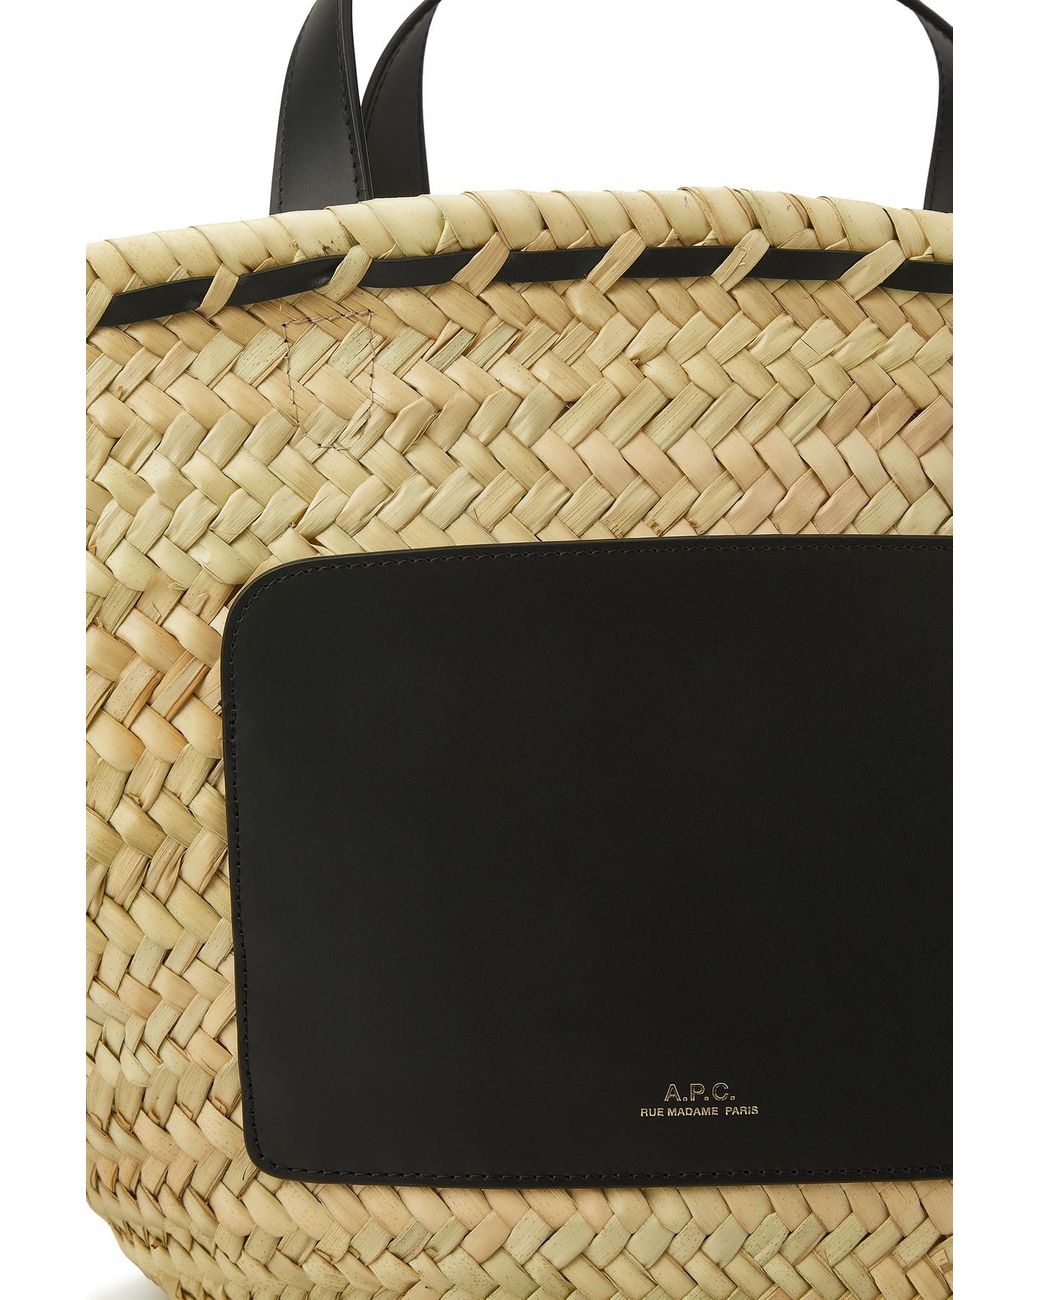 A.P.C. Zoe Small Basket Bag in Black | Lyst